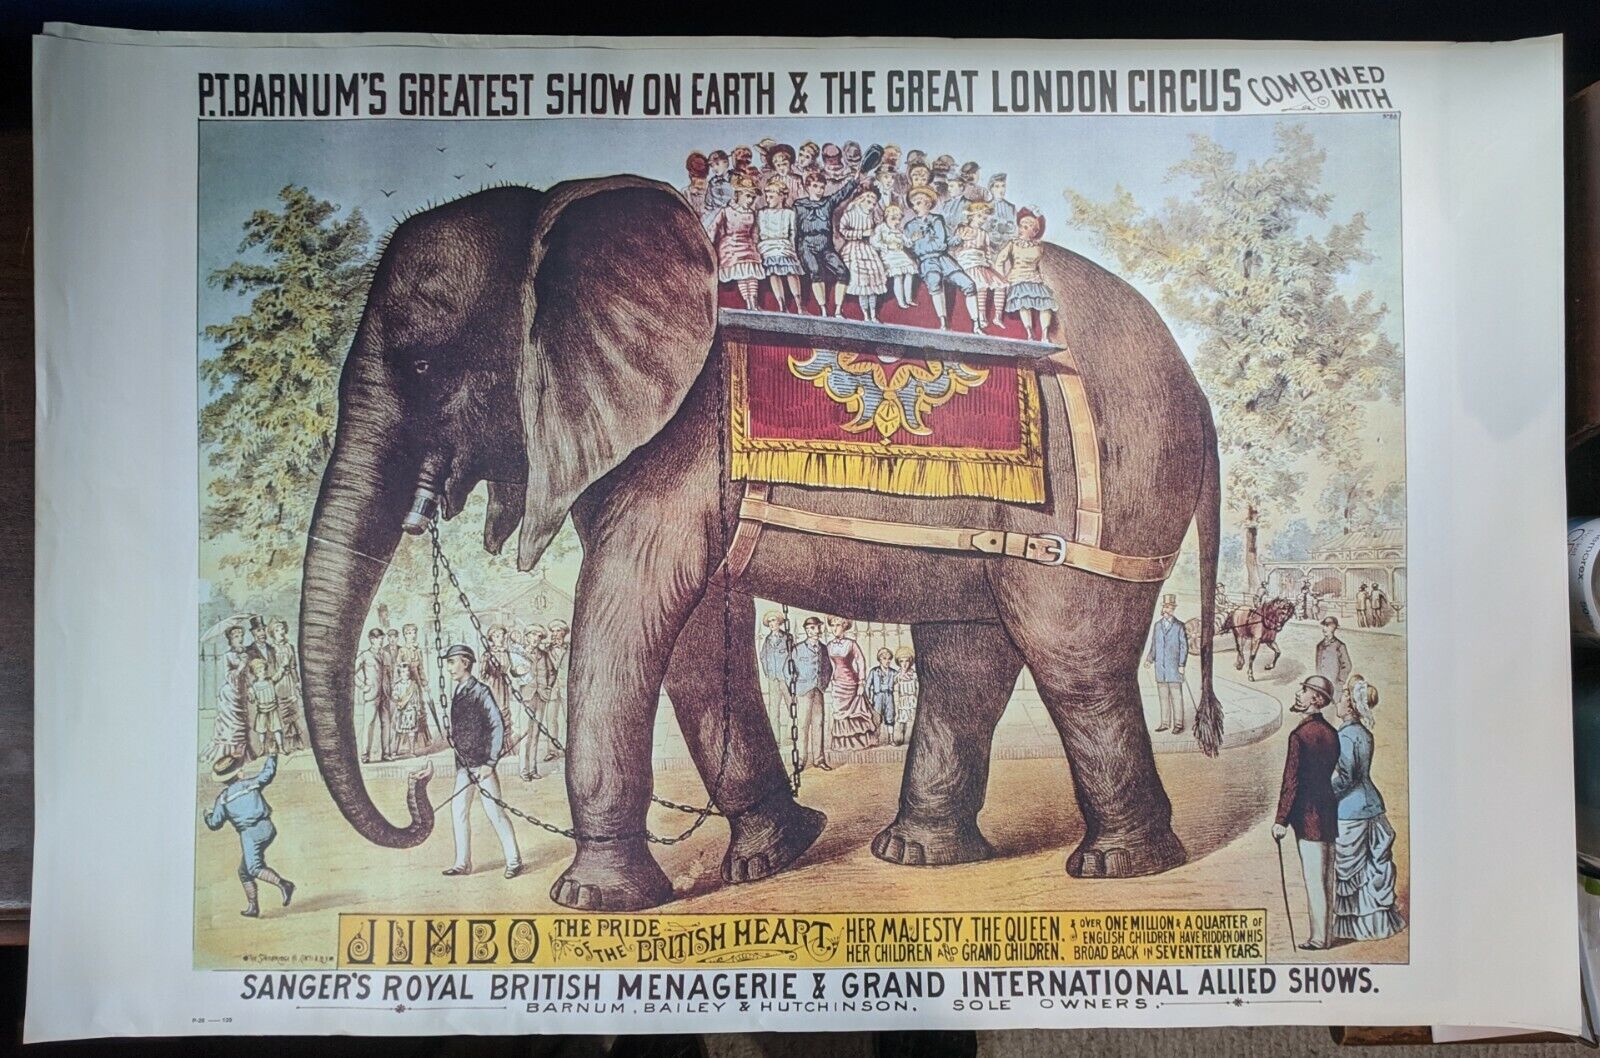 P.T. Barnum's Greatest Show on Earth JUMBO Poster - Pride of the British Heart